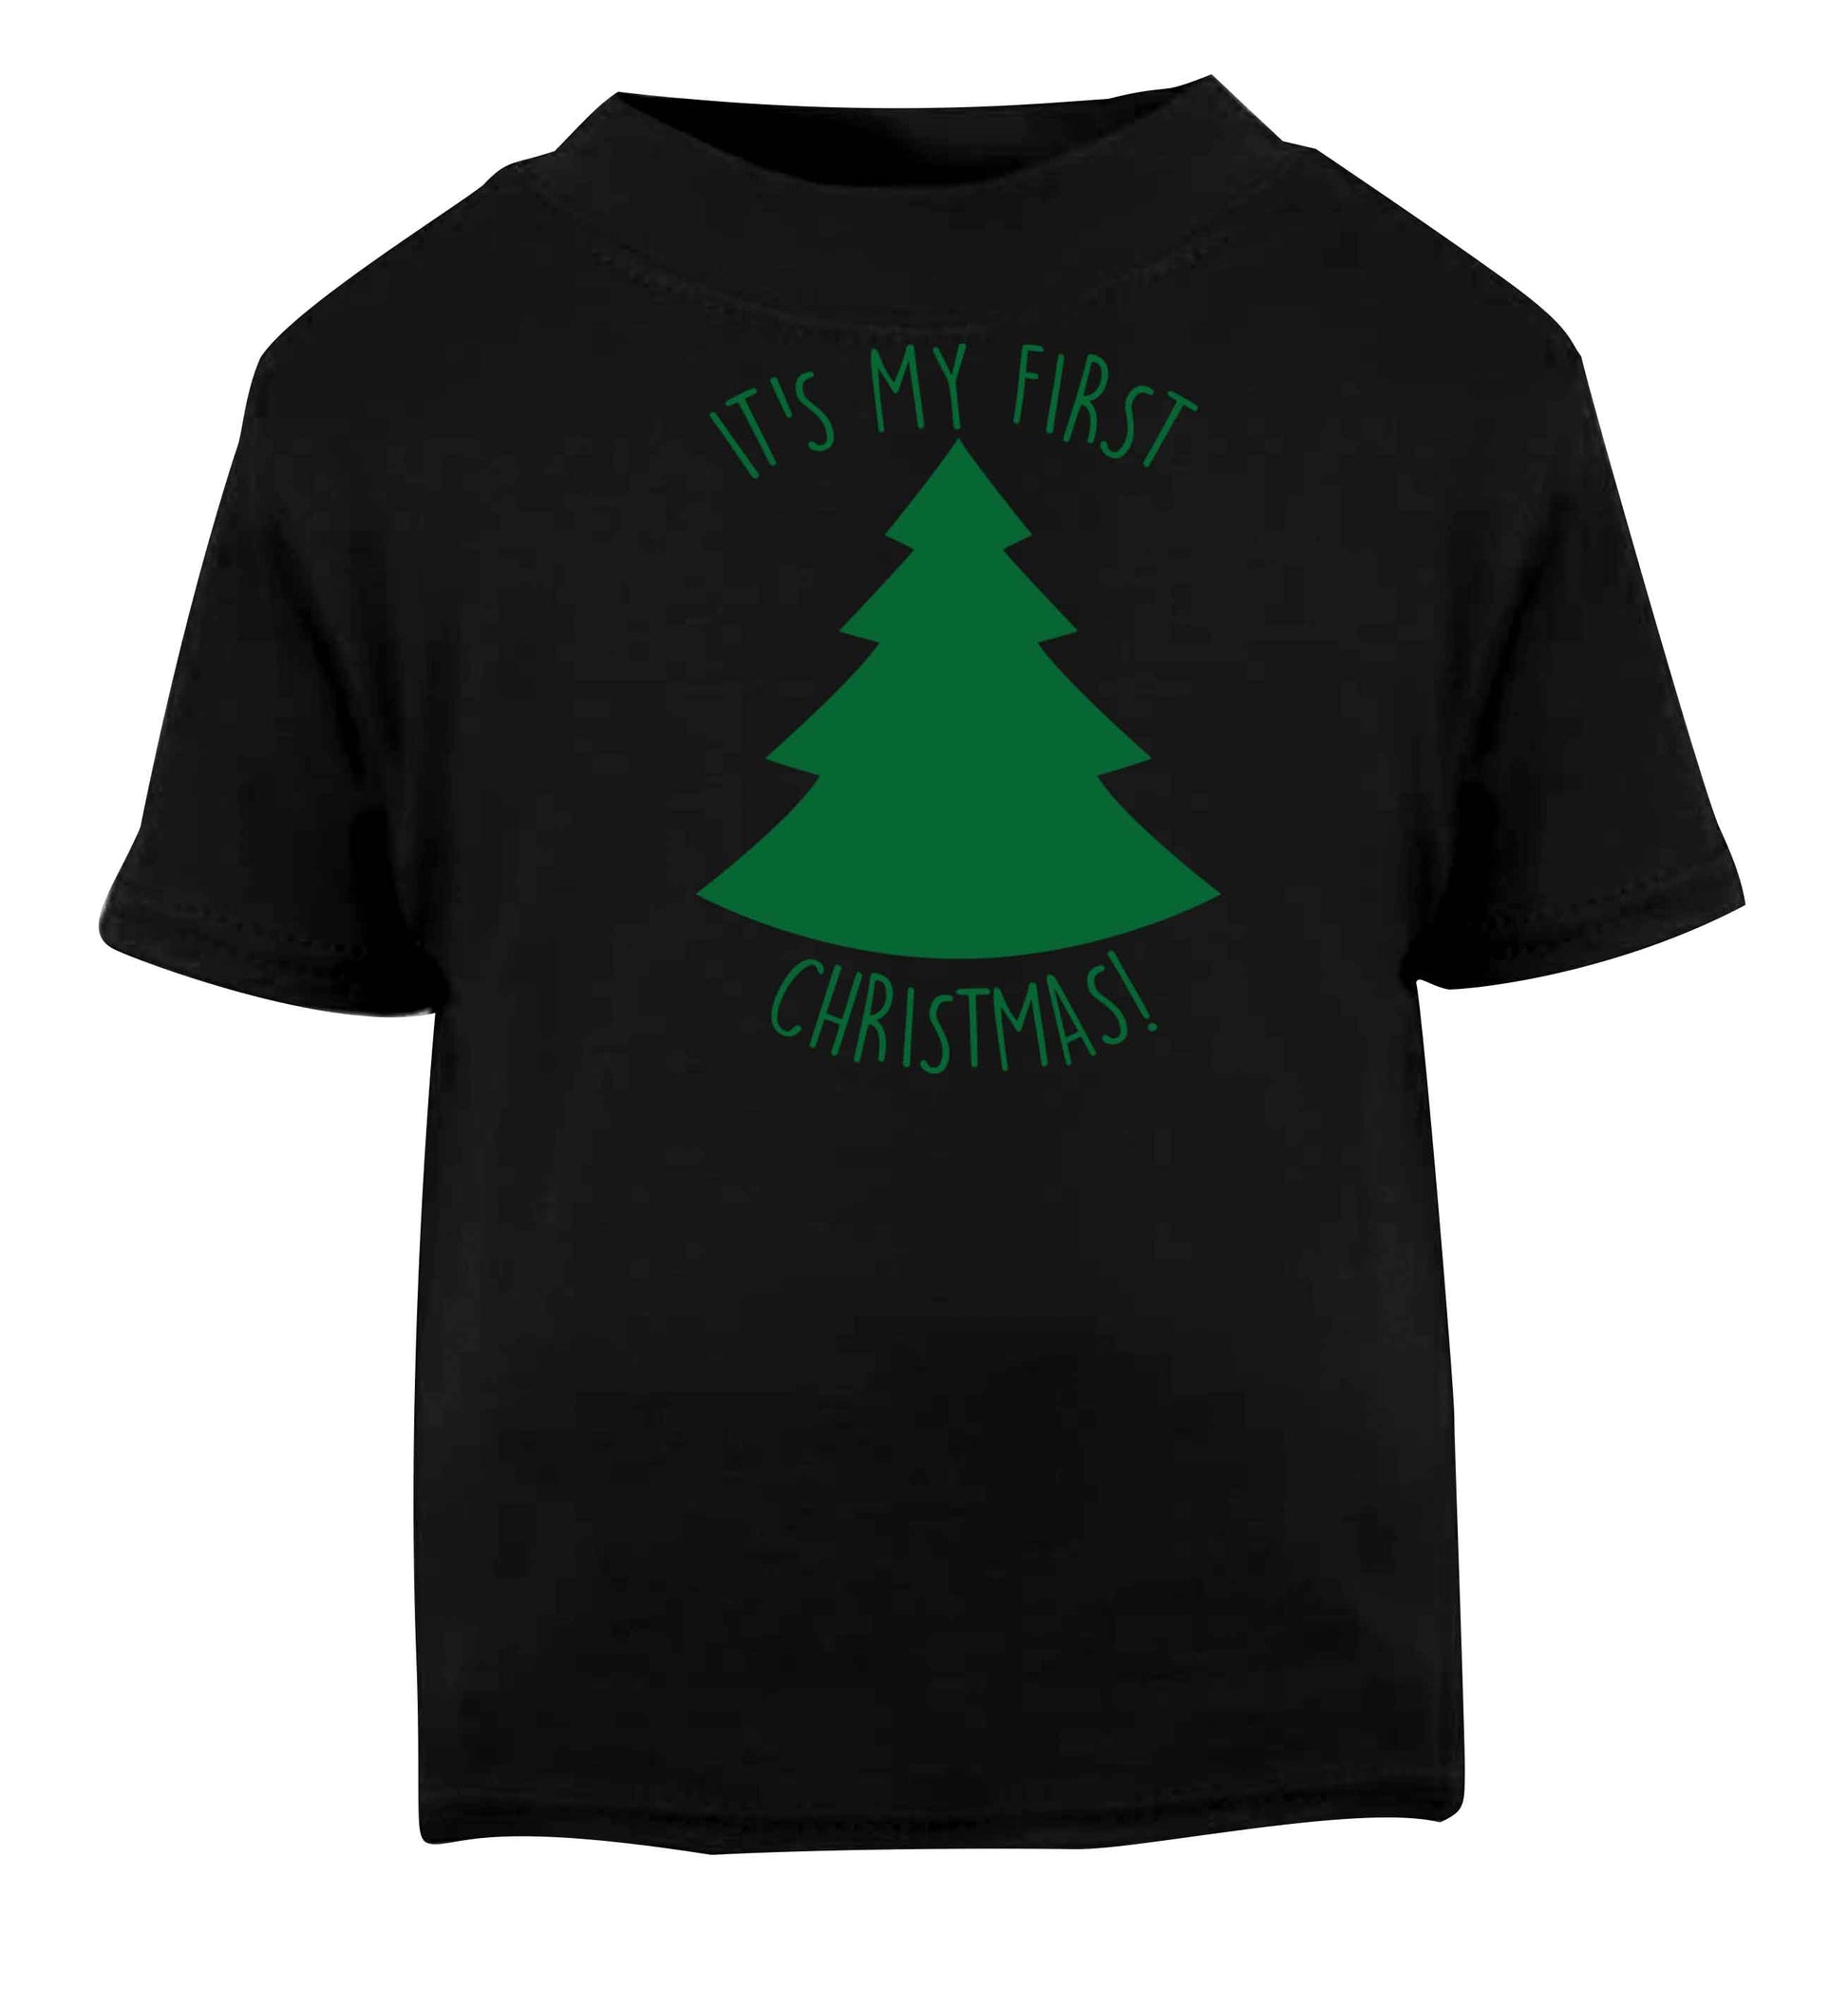 It's my first Christmas - tree Black baby toddler Tshirt 2 years